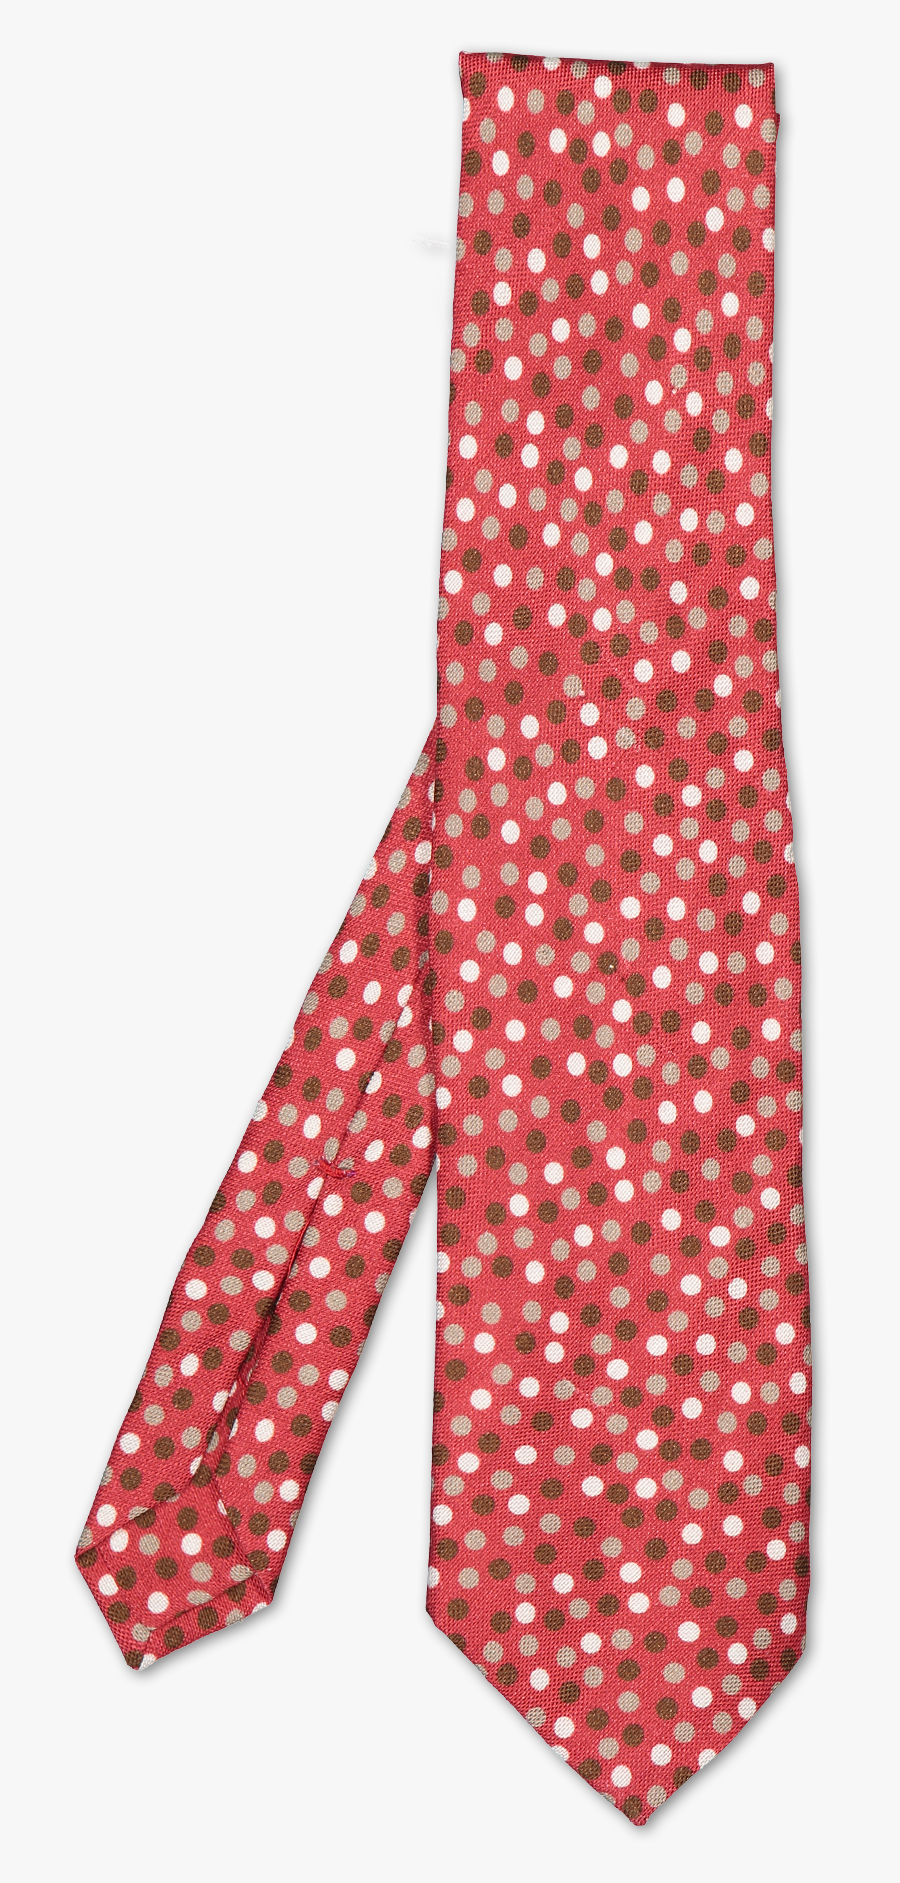 Isaia Tie Red Dot - Polka Dot, Transparent Clipart